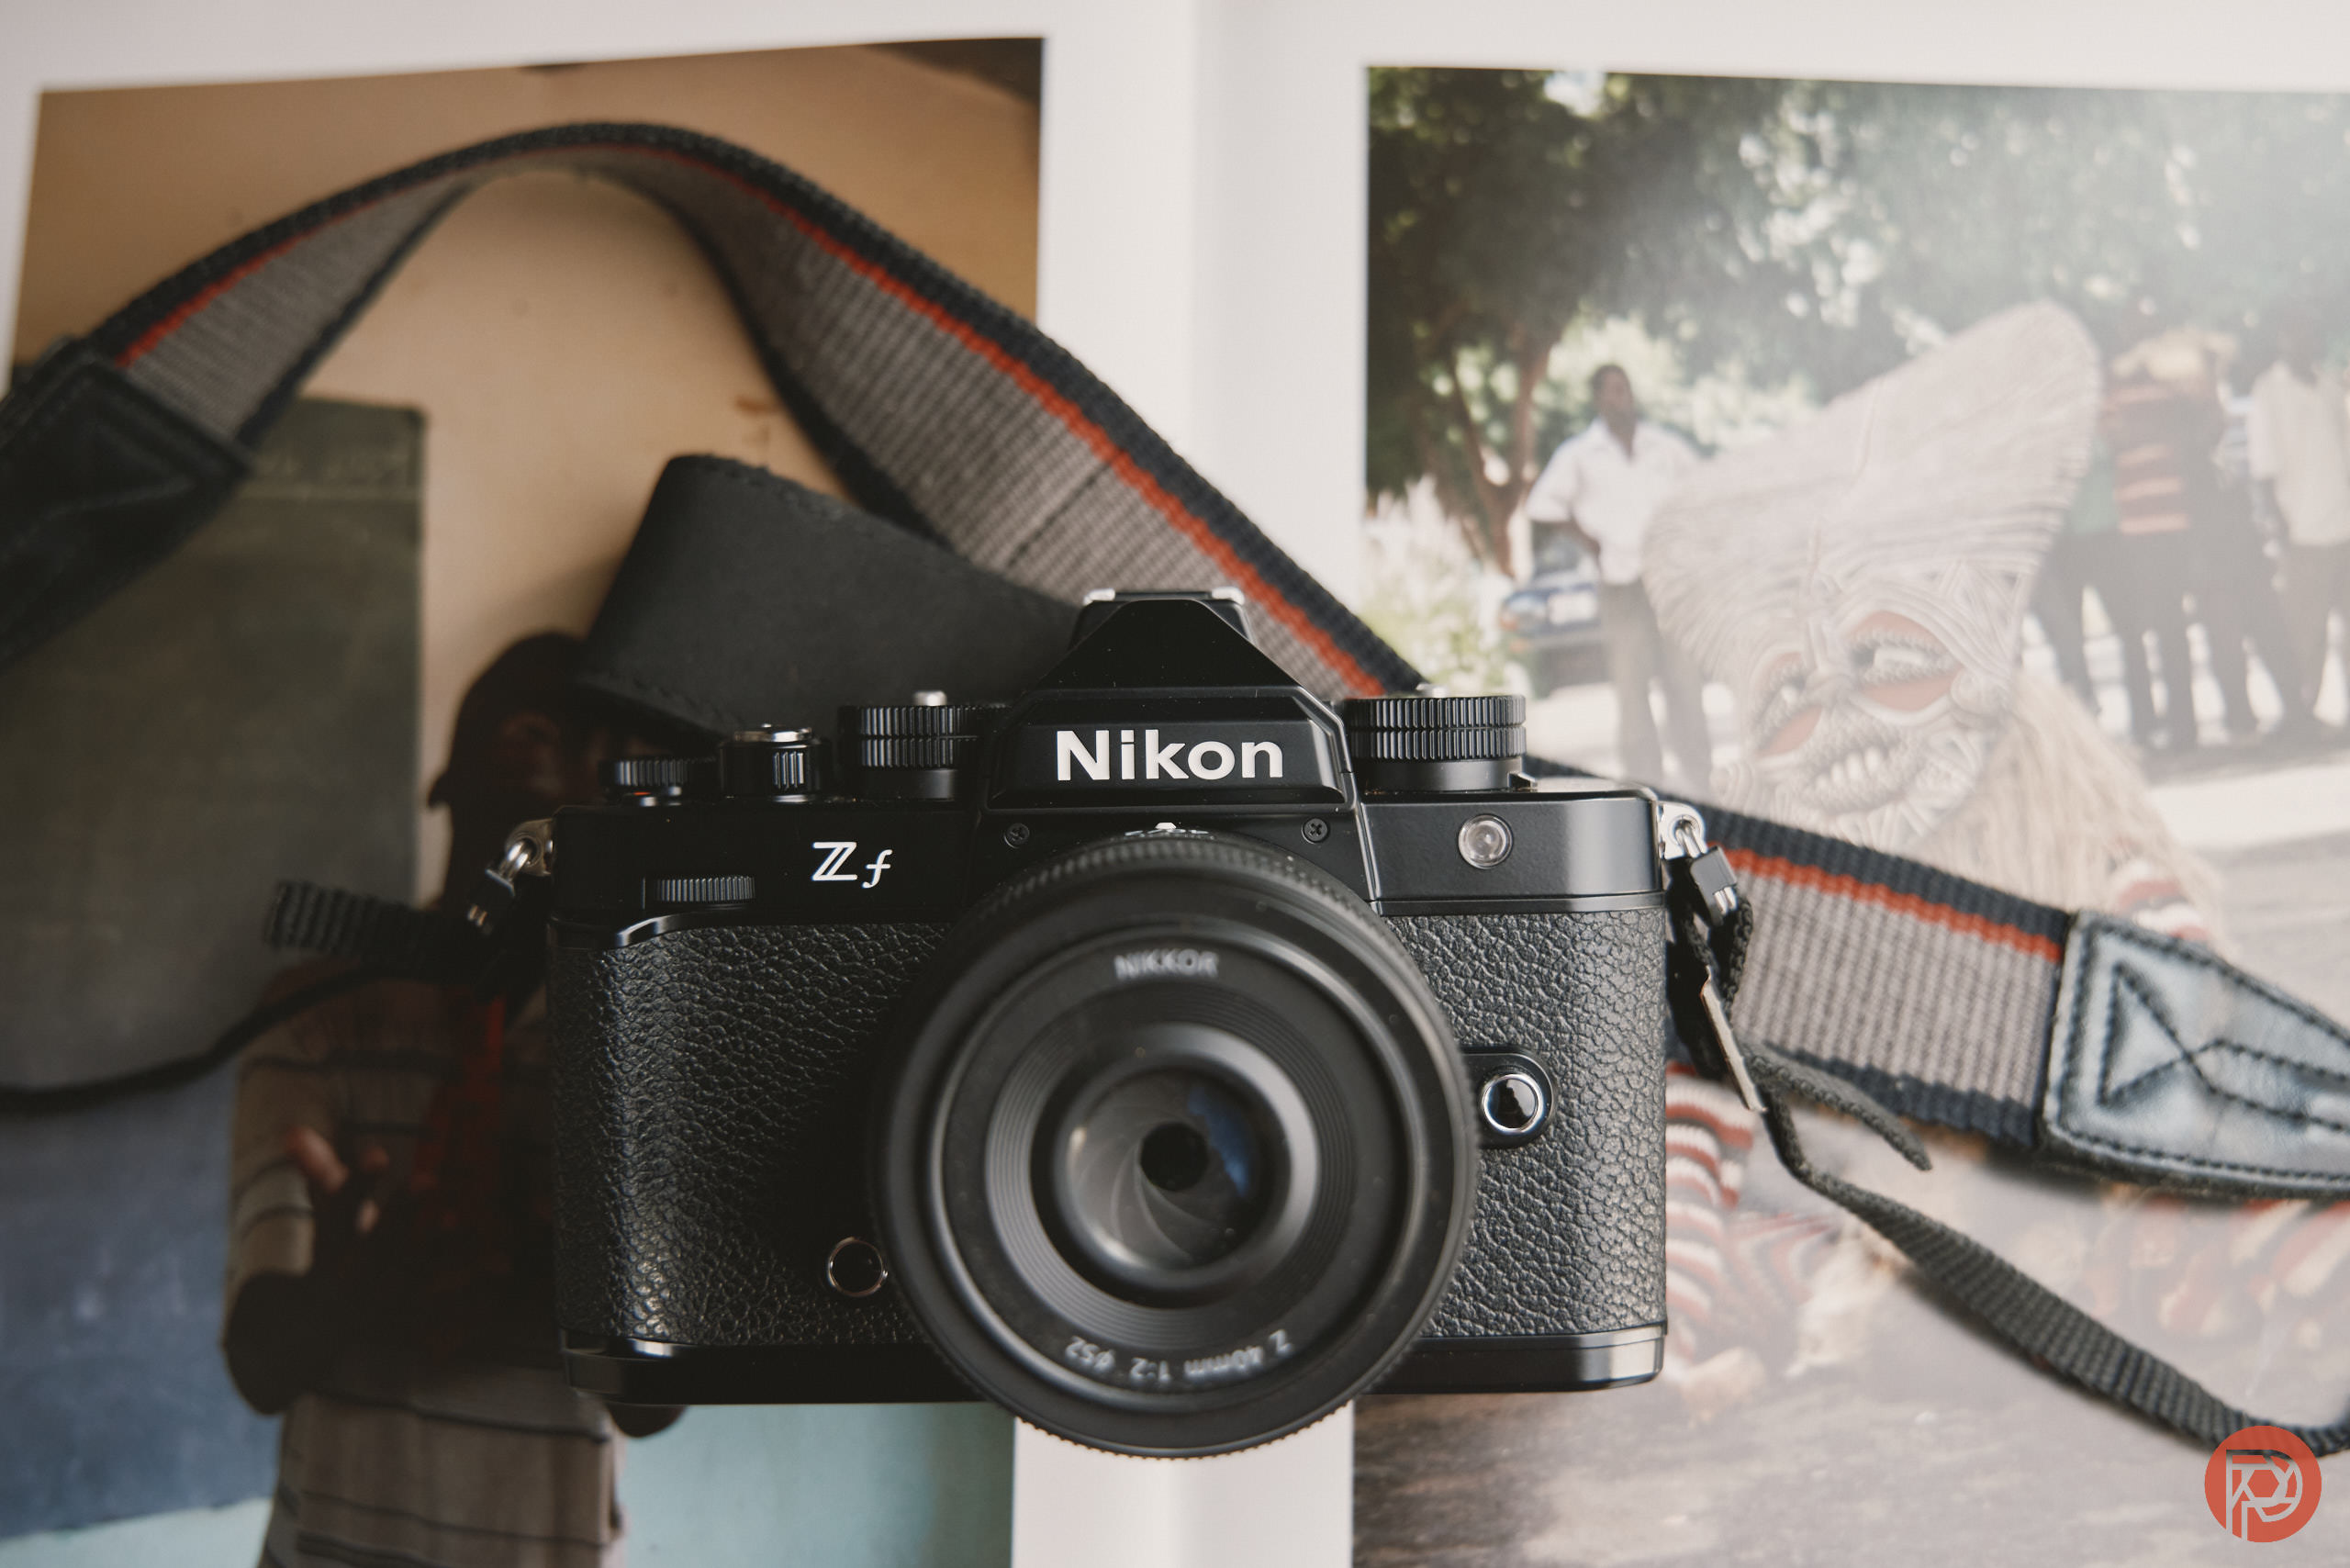 The Best Digital Camera They’ve Made